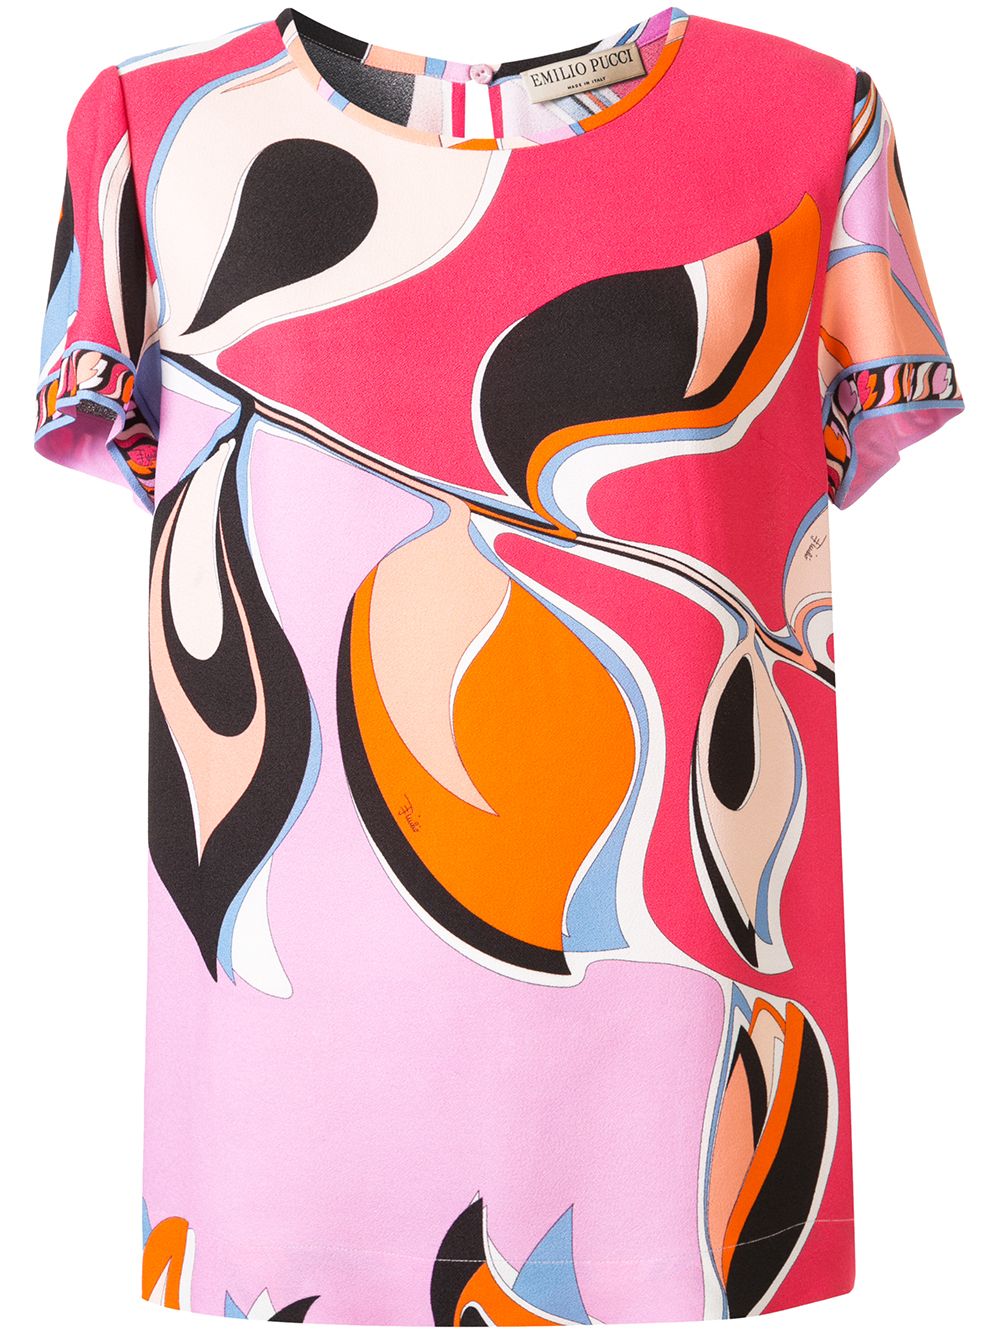 EMILIO PUCCI ABSTRACT PRINT TOP